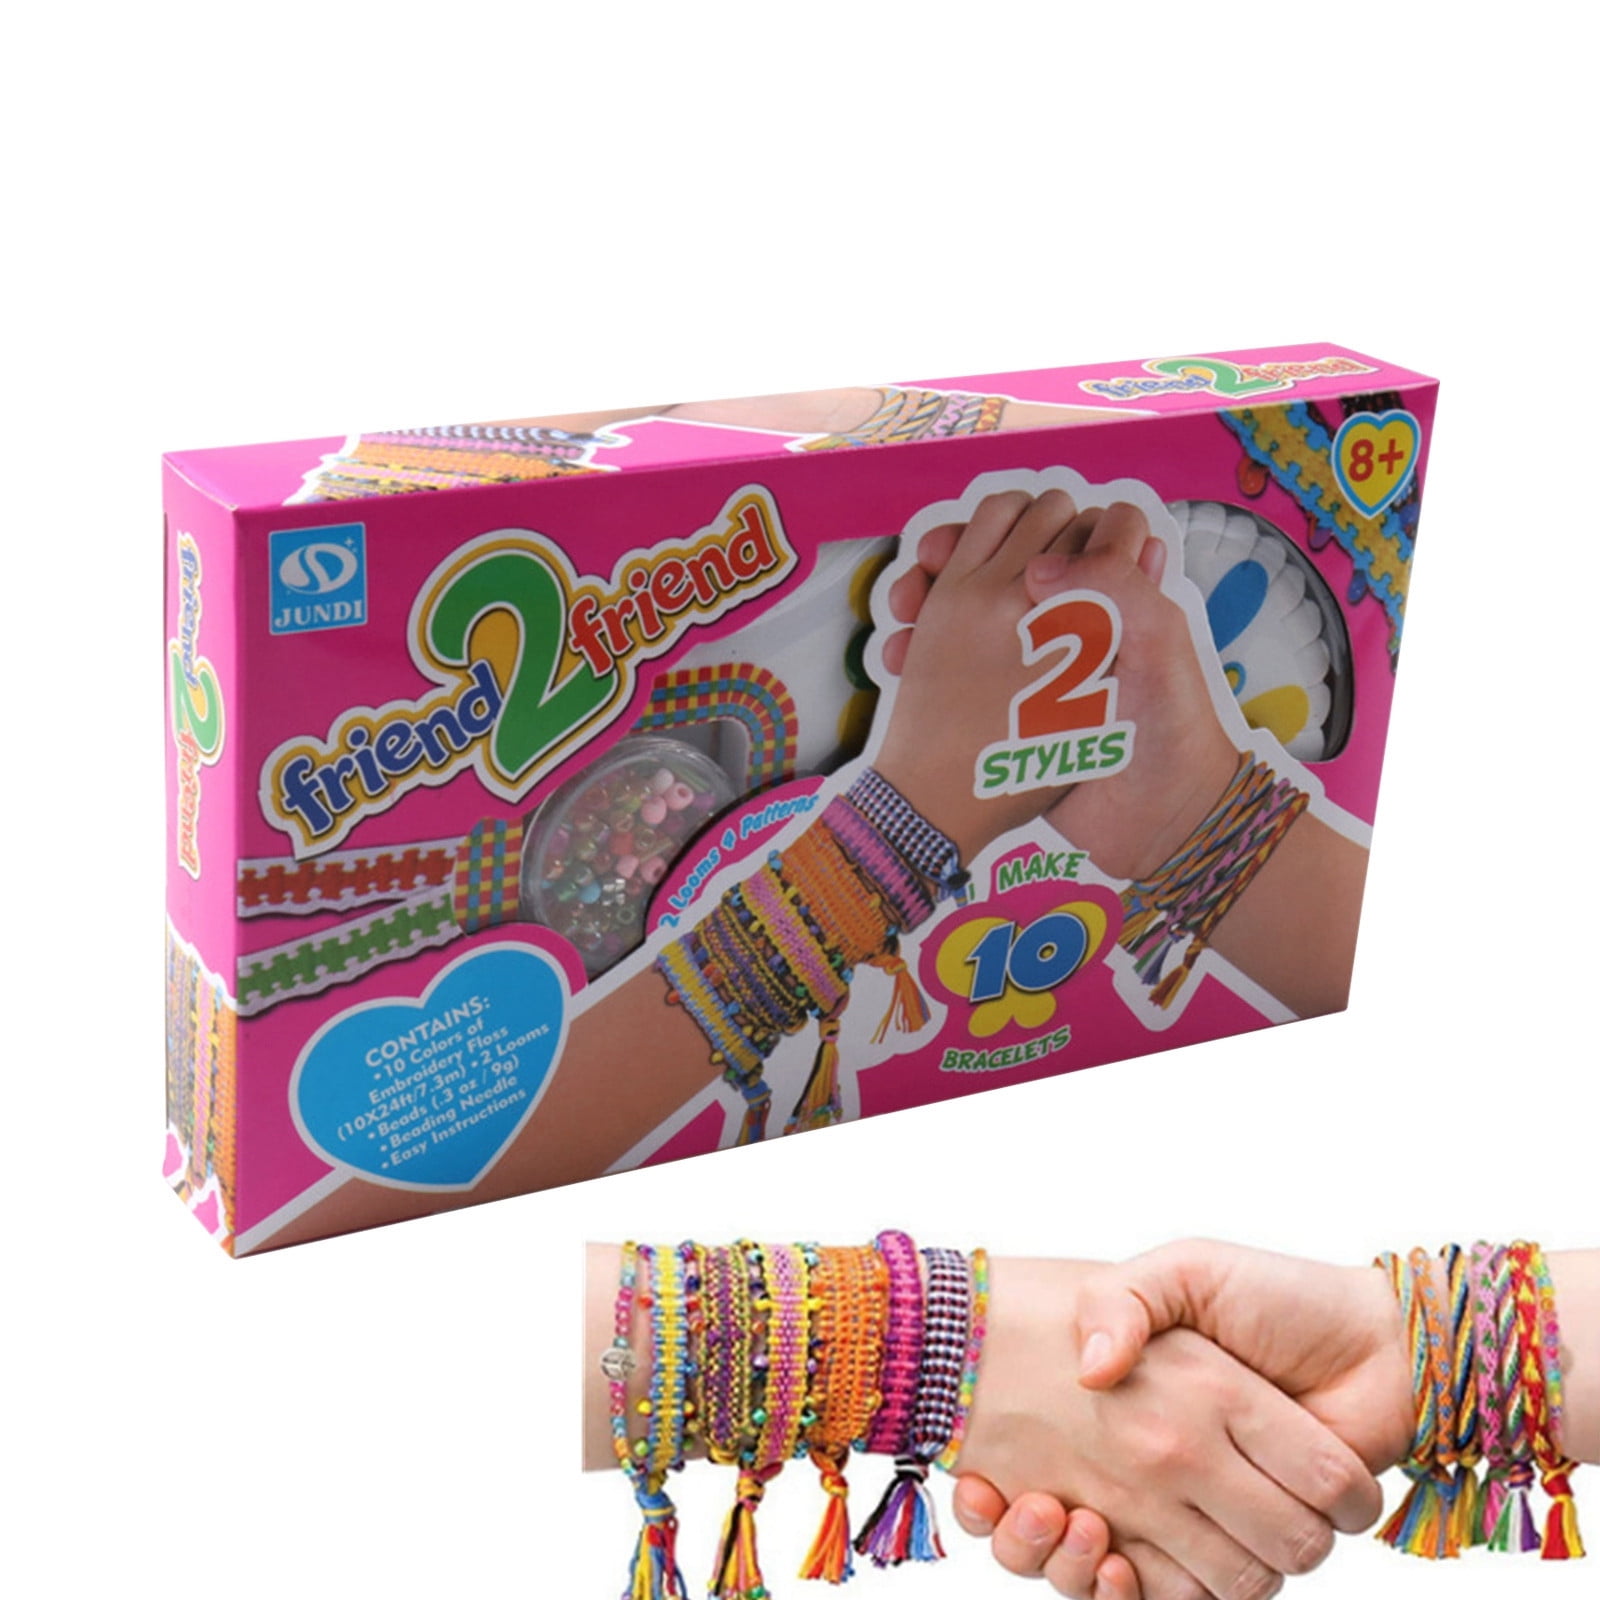 Herrnalise Friendship Bracelet Making Kit Toys for Girls DIY Art Crafts for  8-10 Years Old Kids. Best Birthday Christmas Gift for Ages 6- 12yr Bracelet  String for Travel Activities Supplies for Teens 